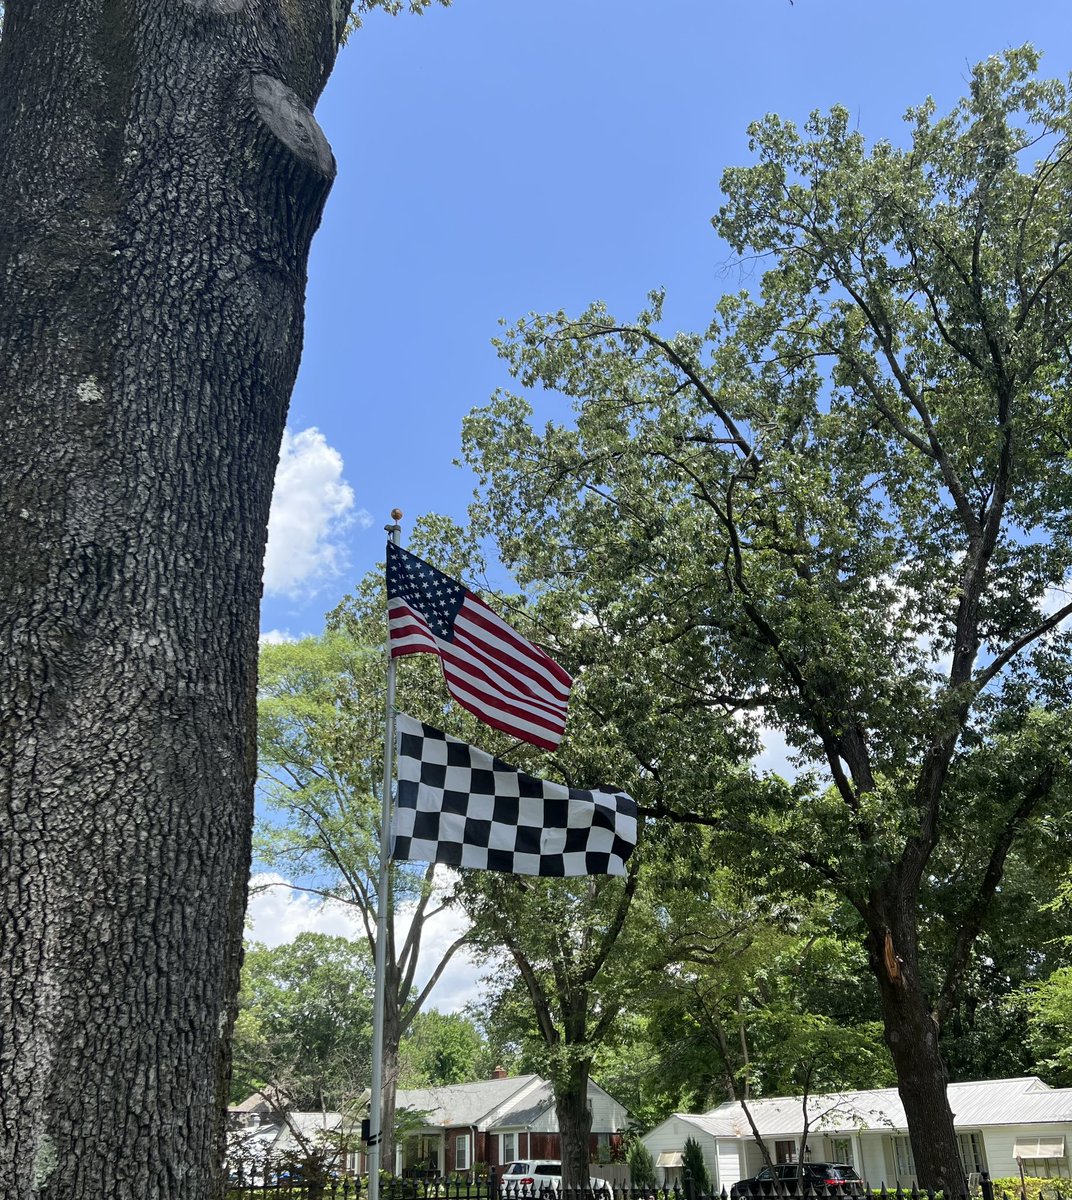 Half staff till noon then raised those stars and stripes and  added checkers to full staff for a beautiful #MemorialDay24 and @CBellRacing  and Thomas Kennedy victory @rheemracing @JoeGibbsRacing @ToyotaRacing